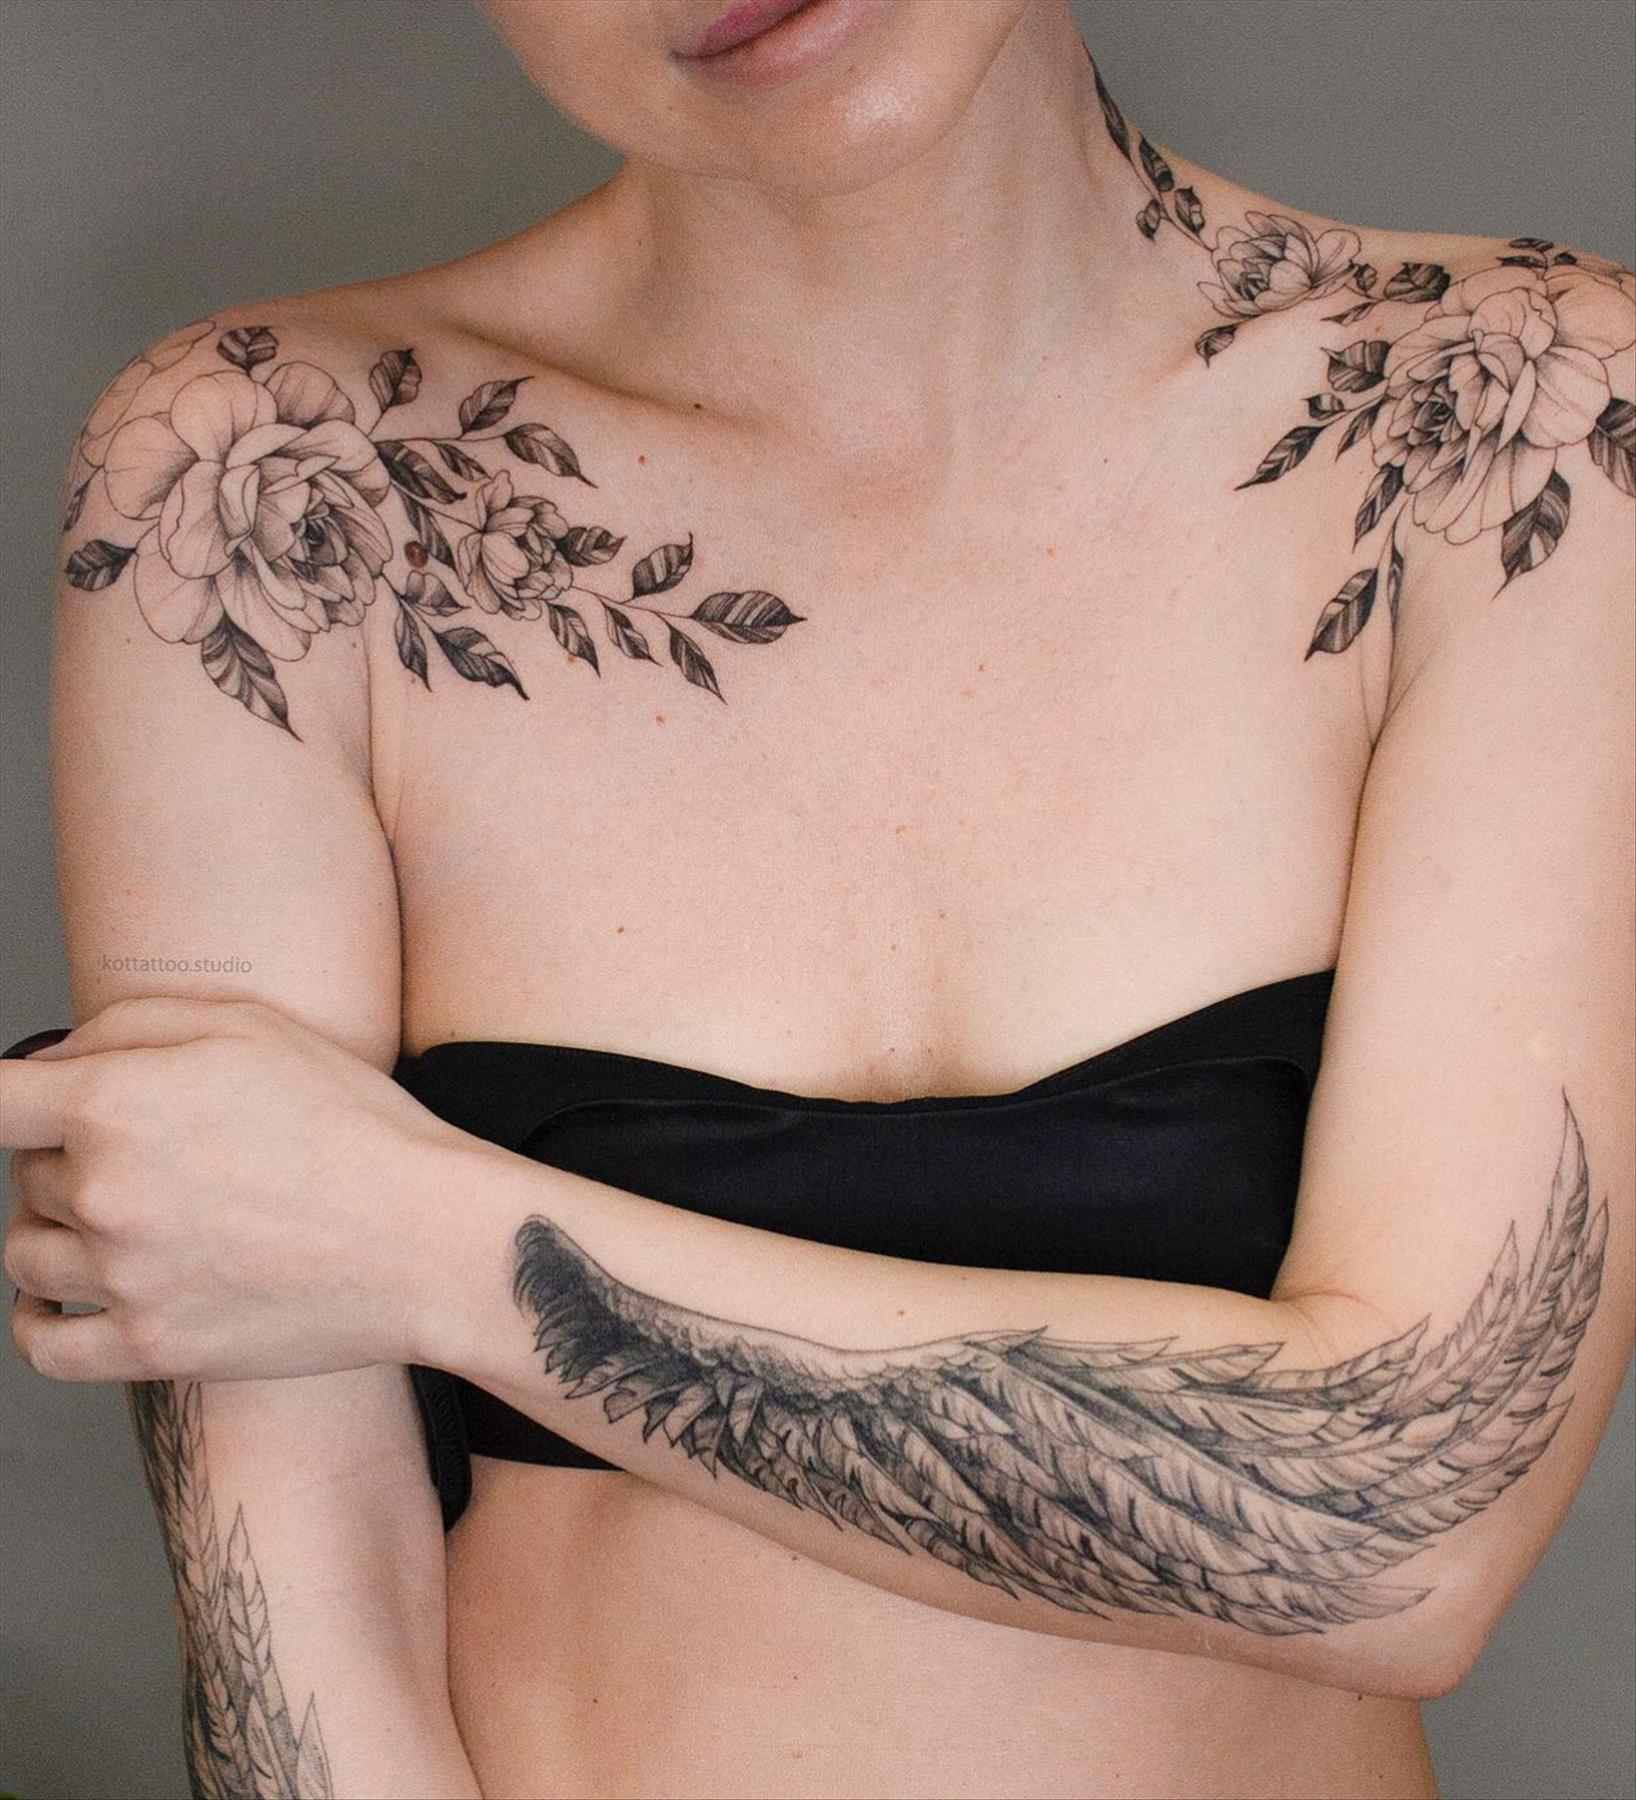 Stunning shoulder tattoos for women 2022 for a chic look